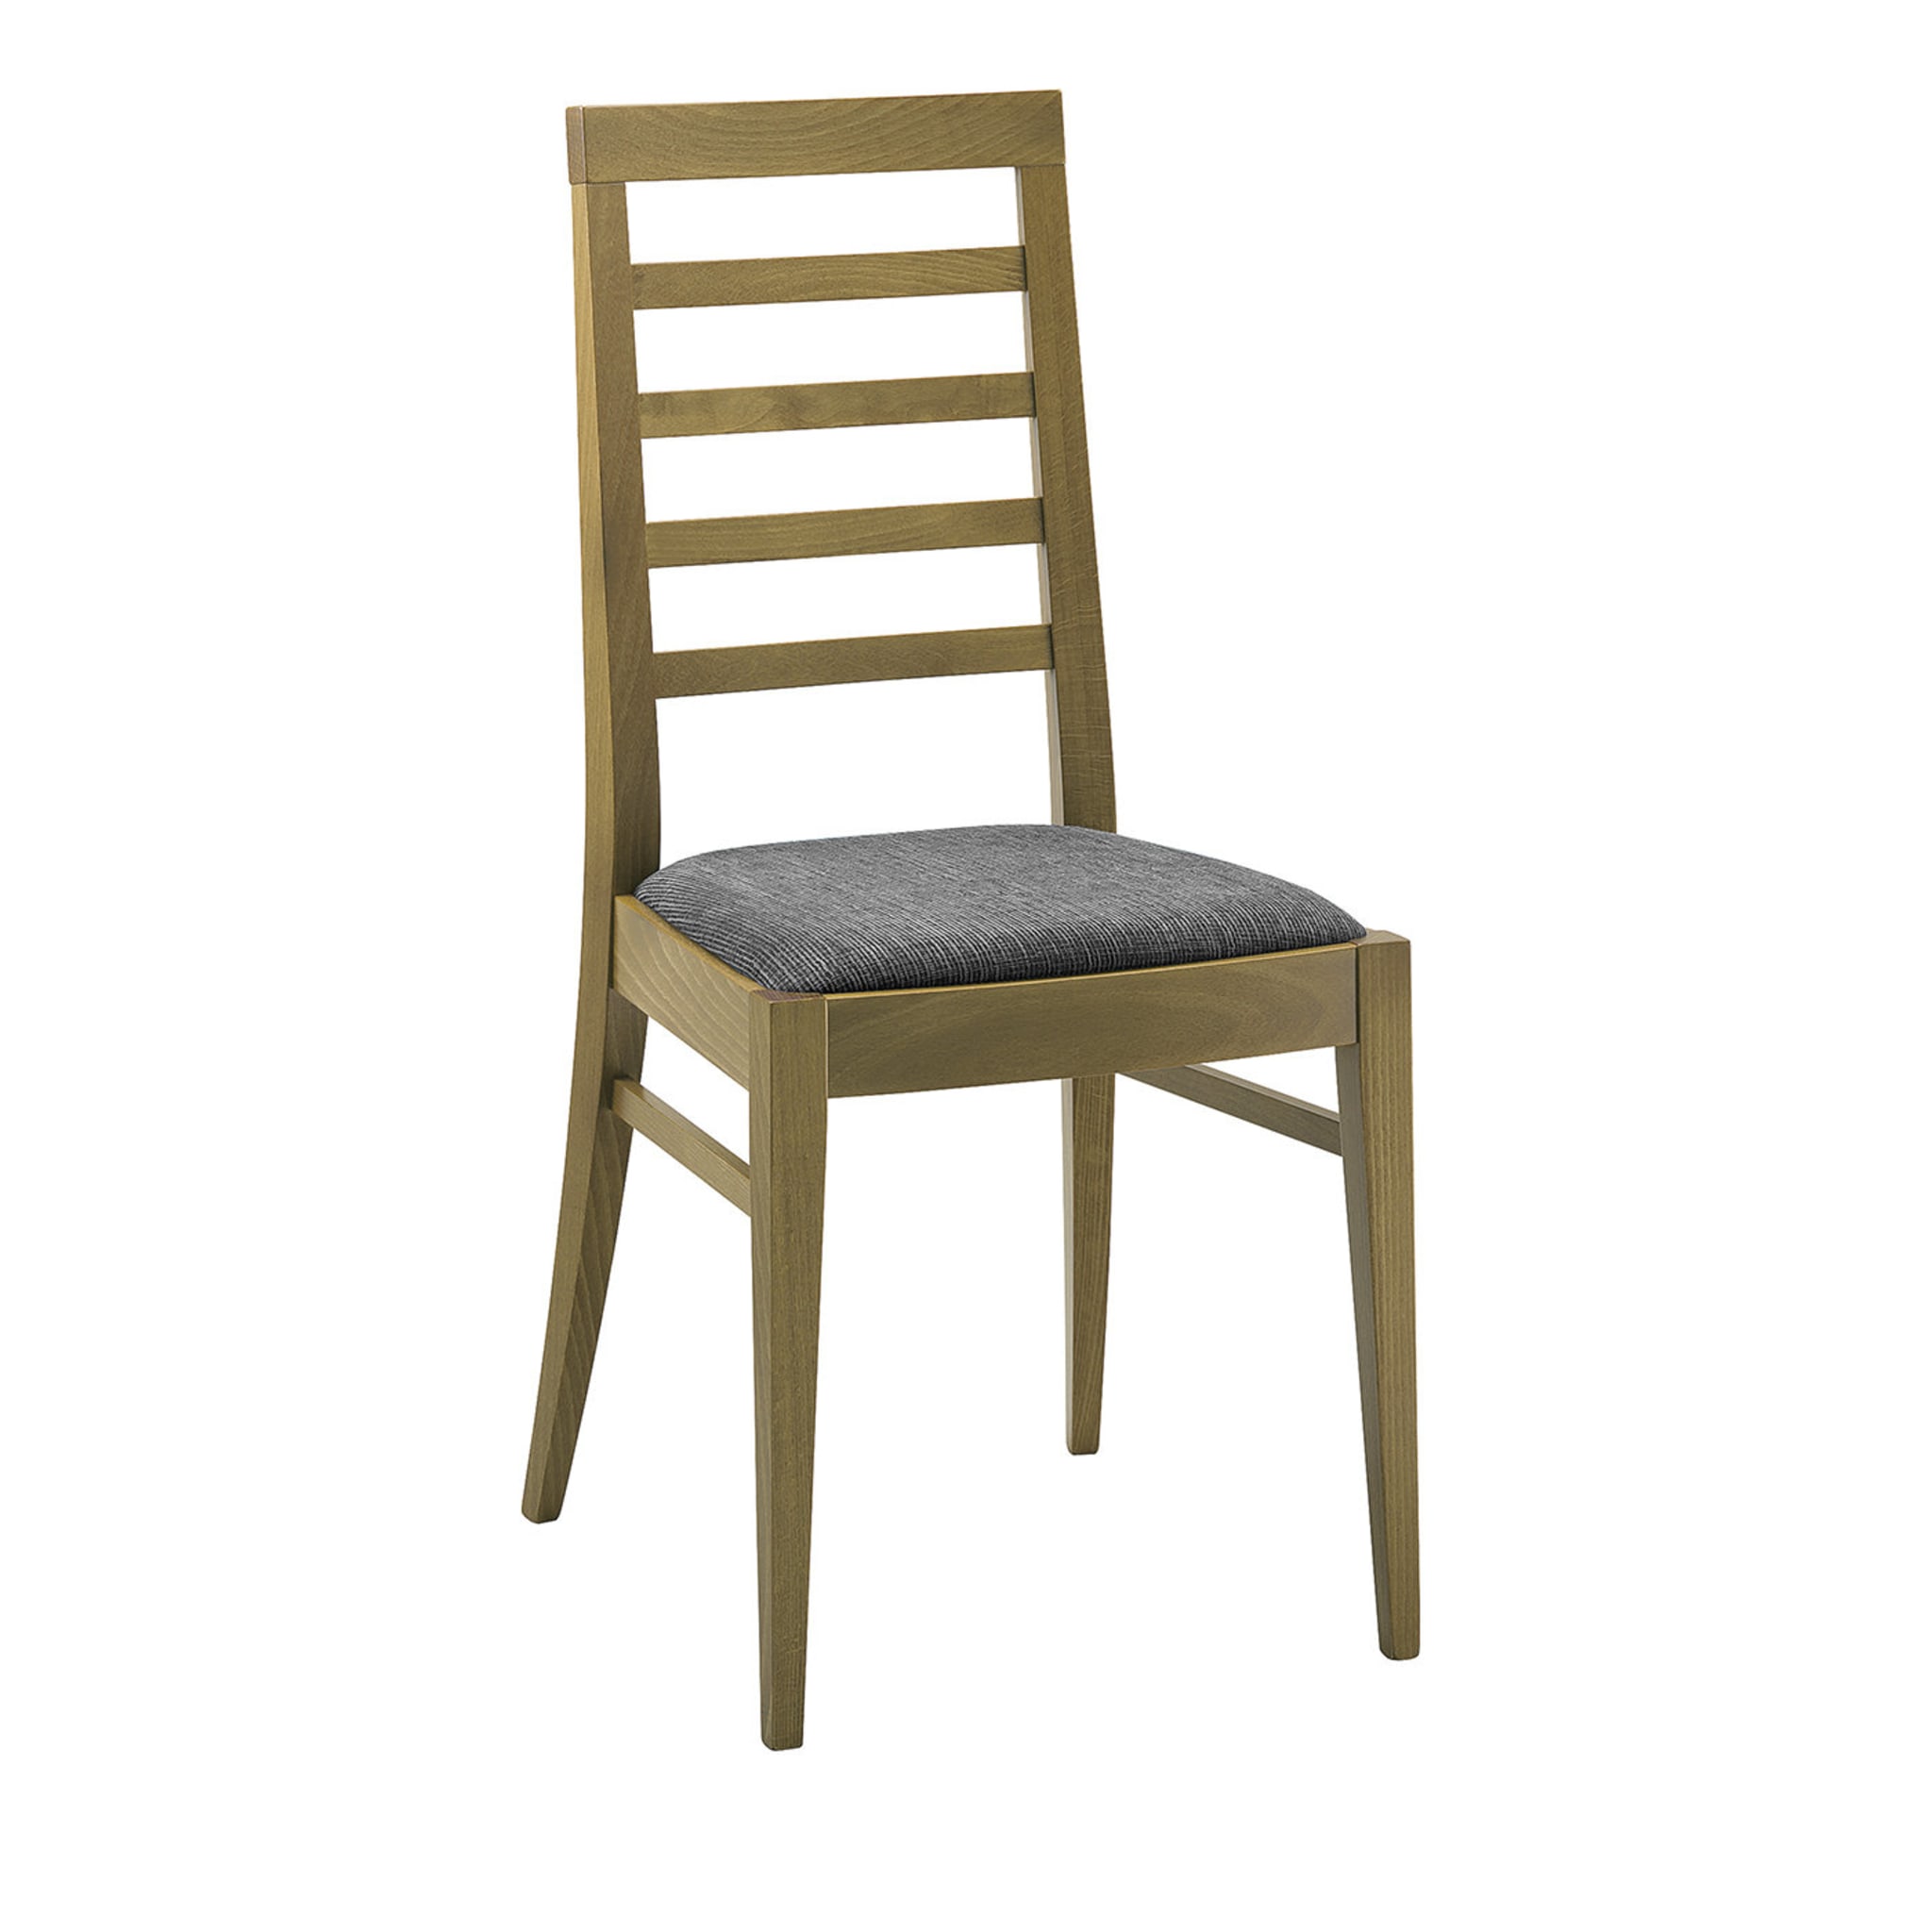 Set of 4 Felix Chairs - Main view